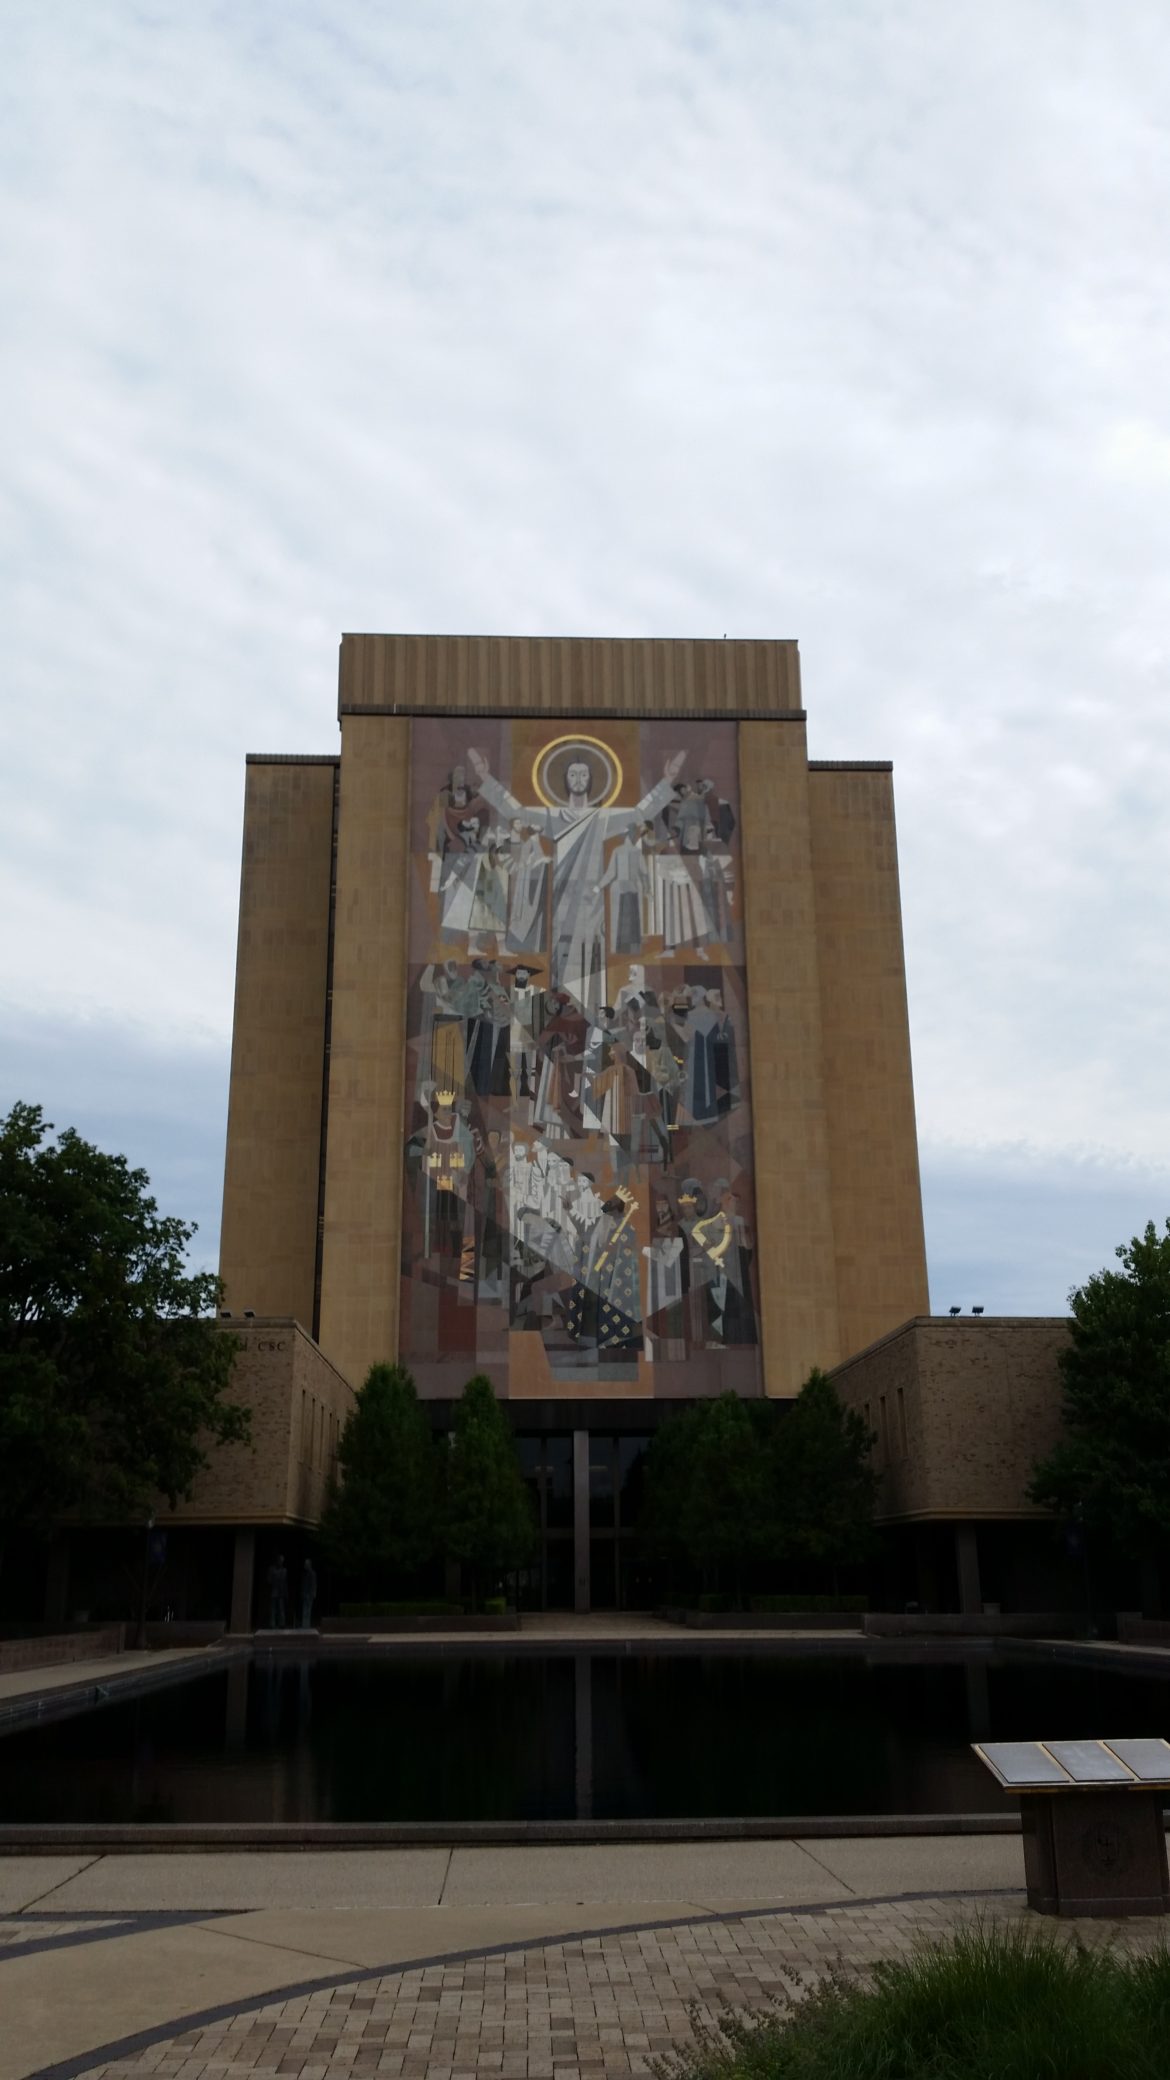 The Word of Life (also known as “Touchdown Jesus”).